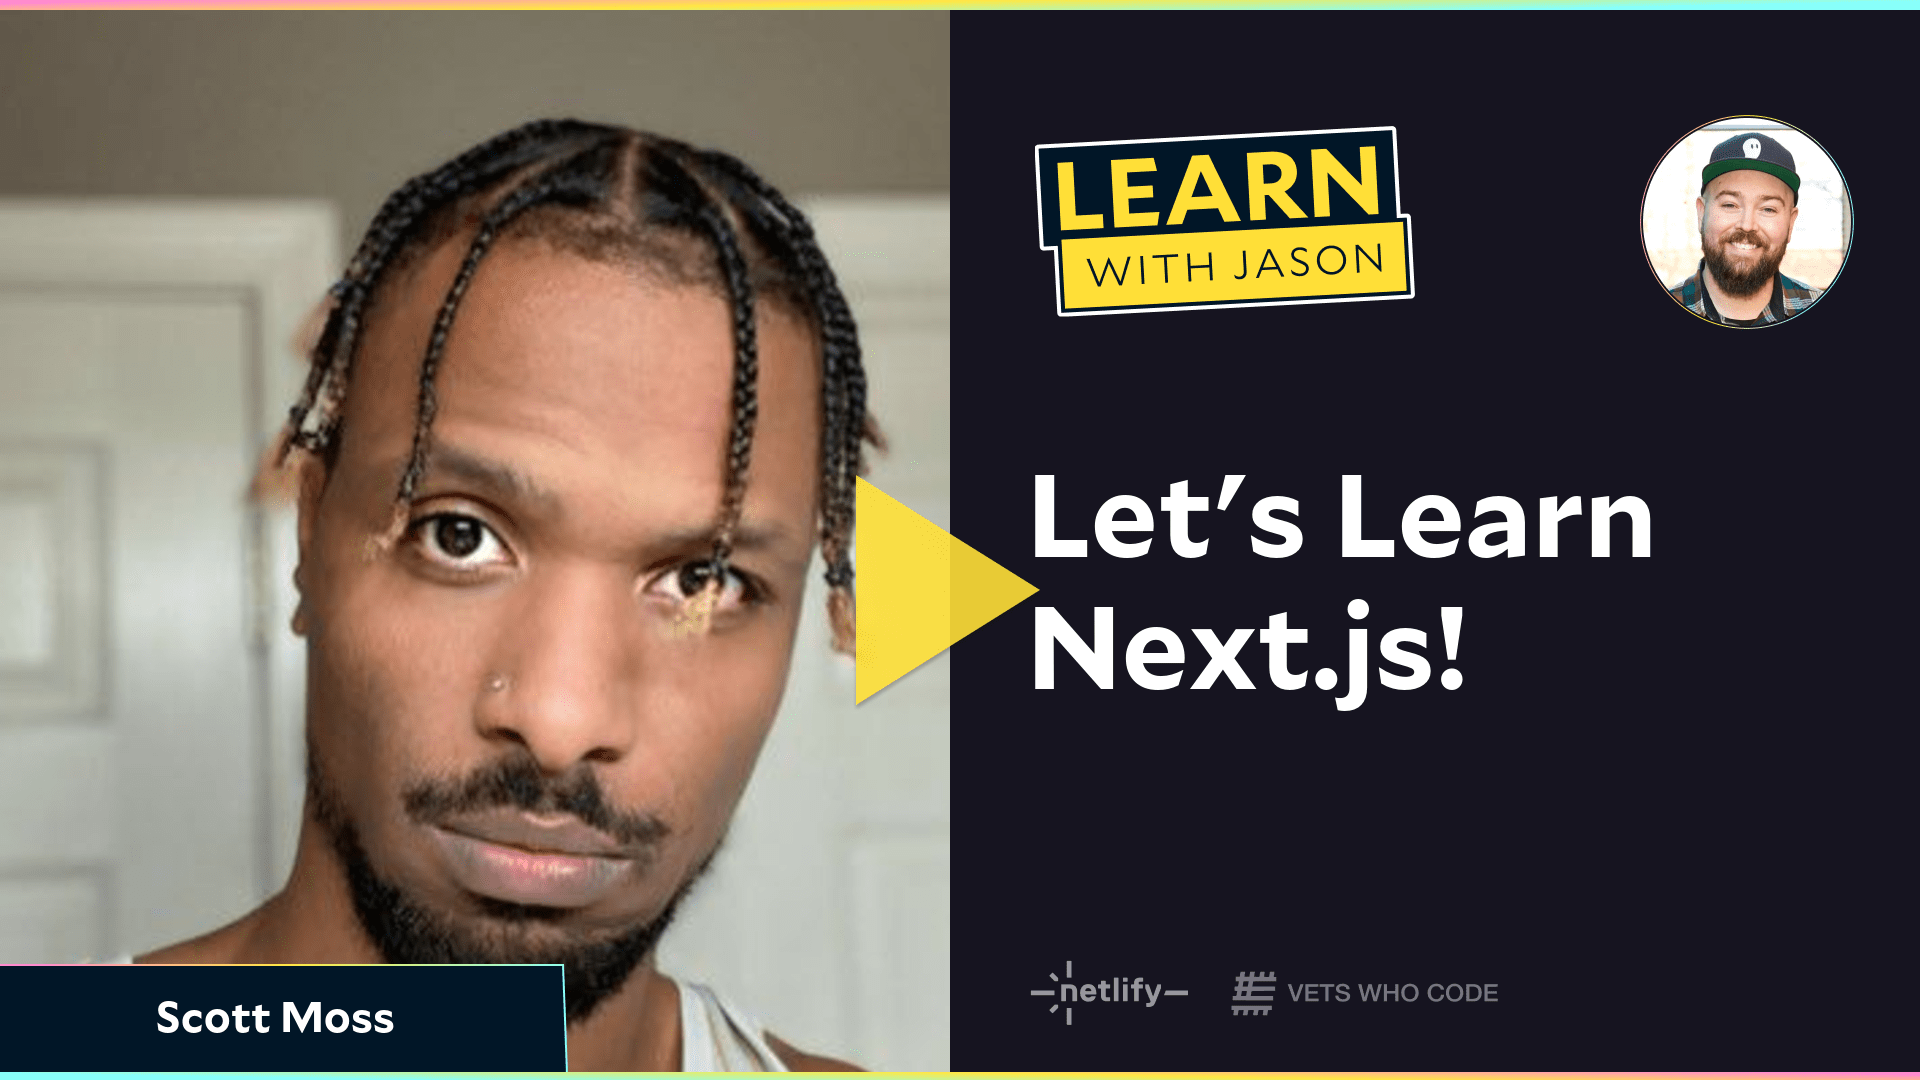 Let's Learn Next.js! (with Scott Moss)